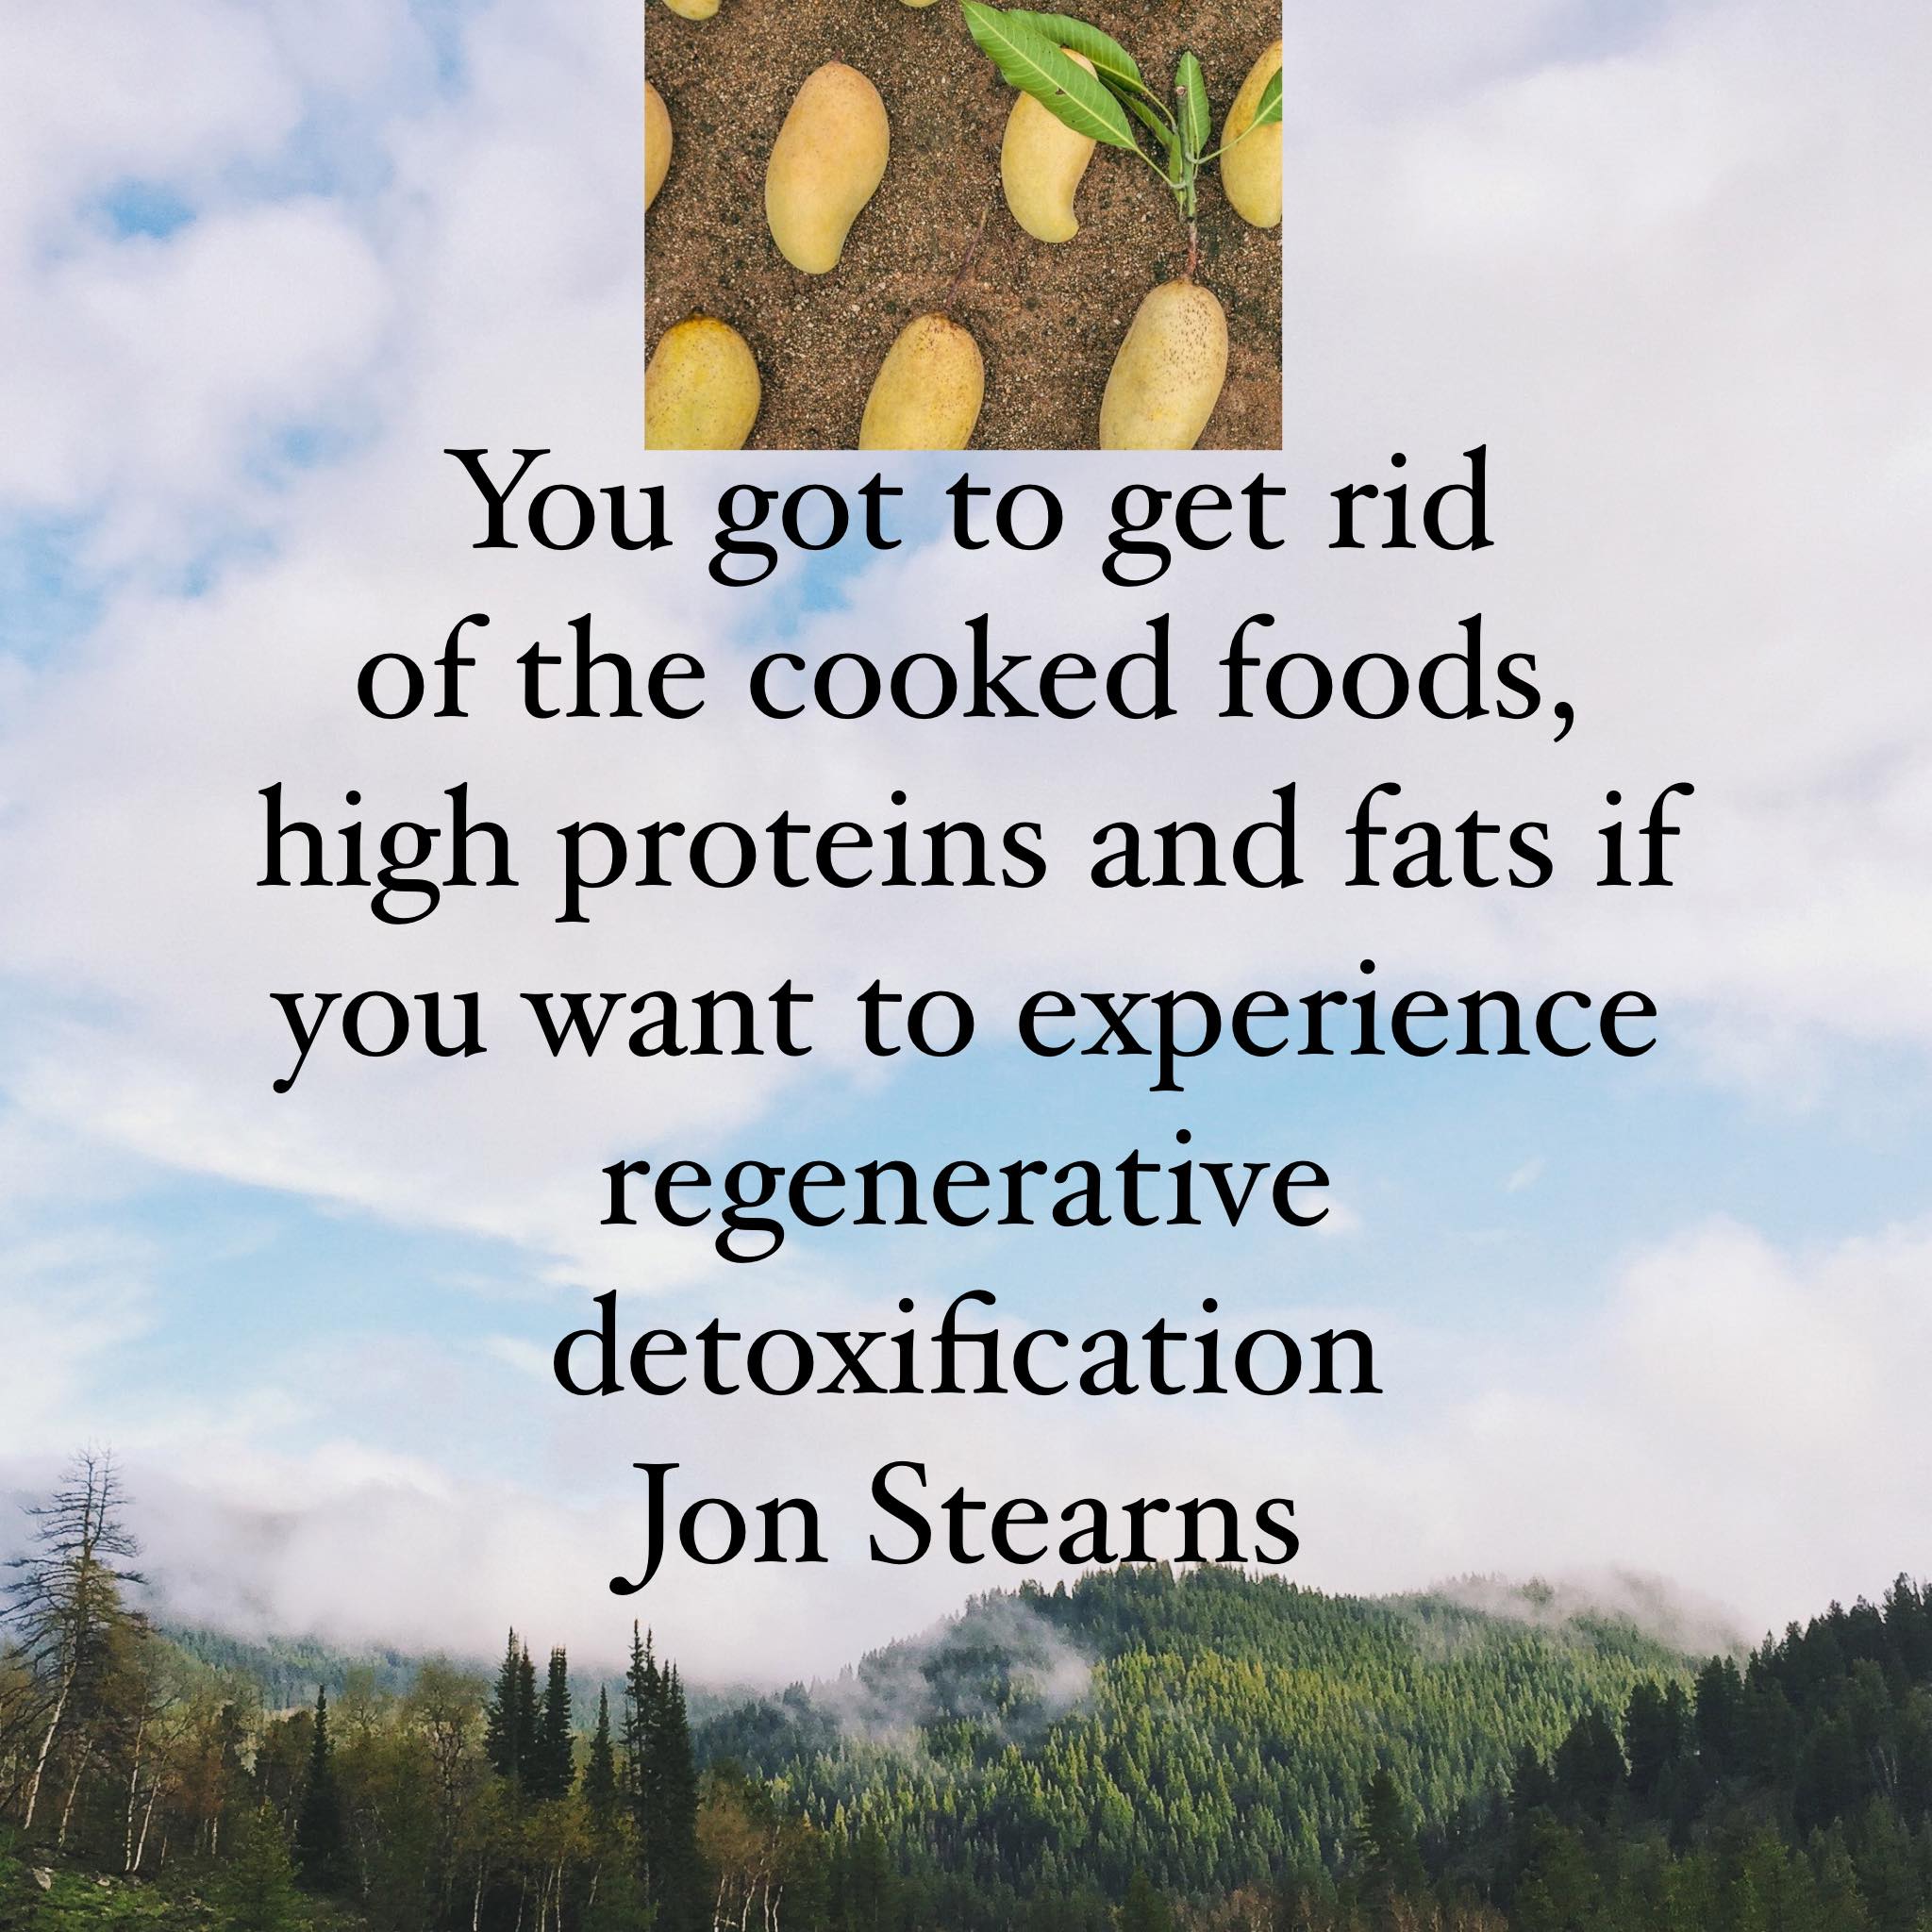 You must get rid of all cooked foods to experience regeneration through detoxification